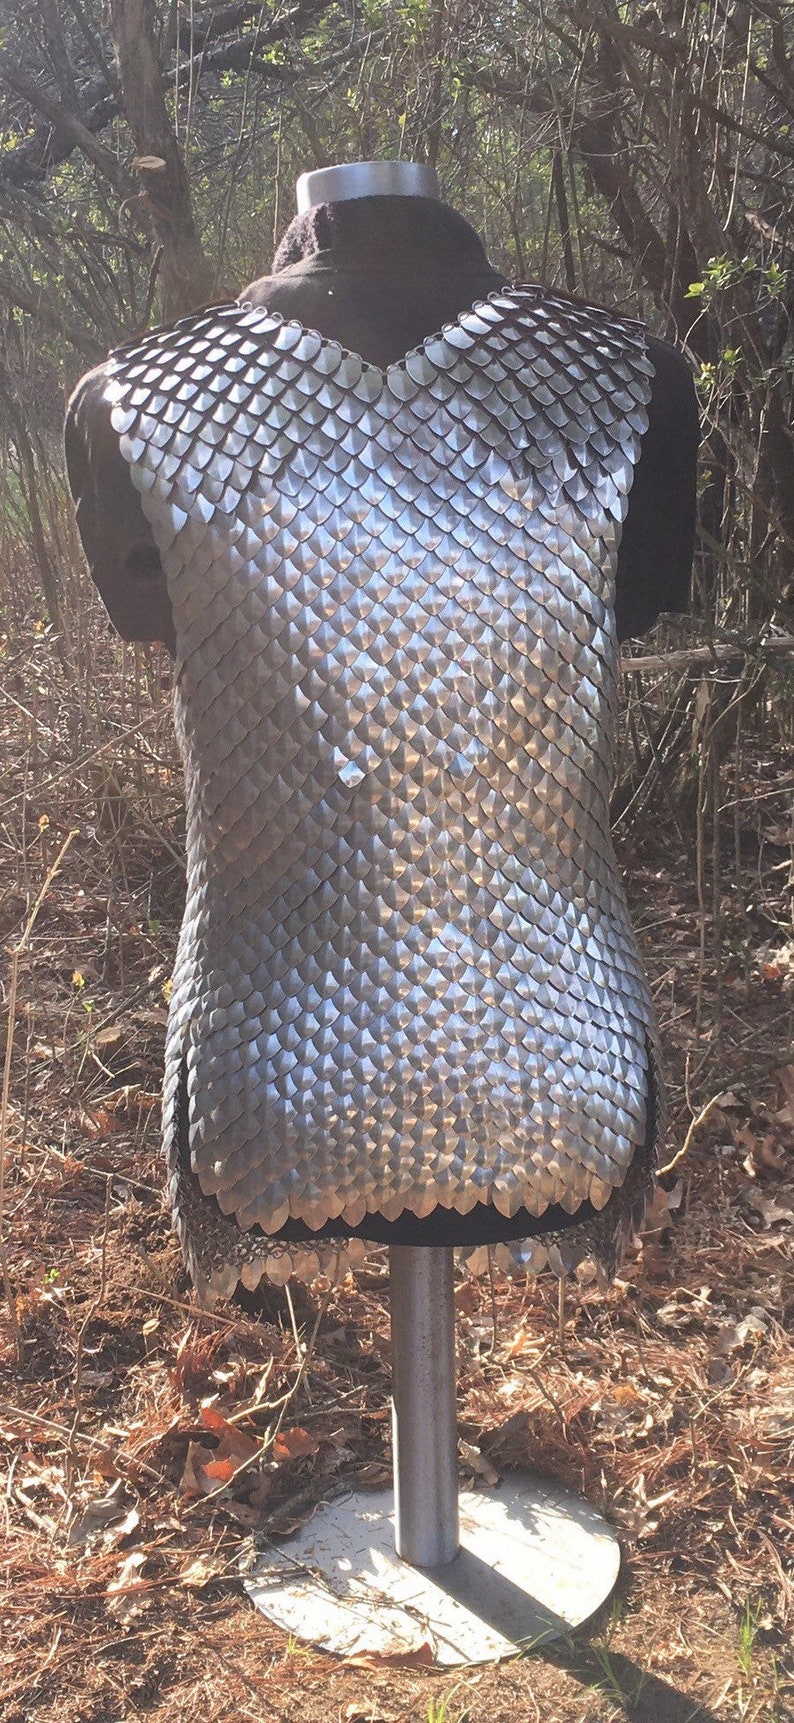 Standard Scalemail Armor - Etsy